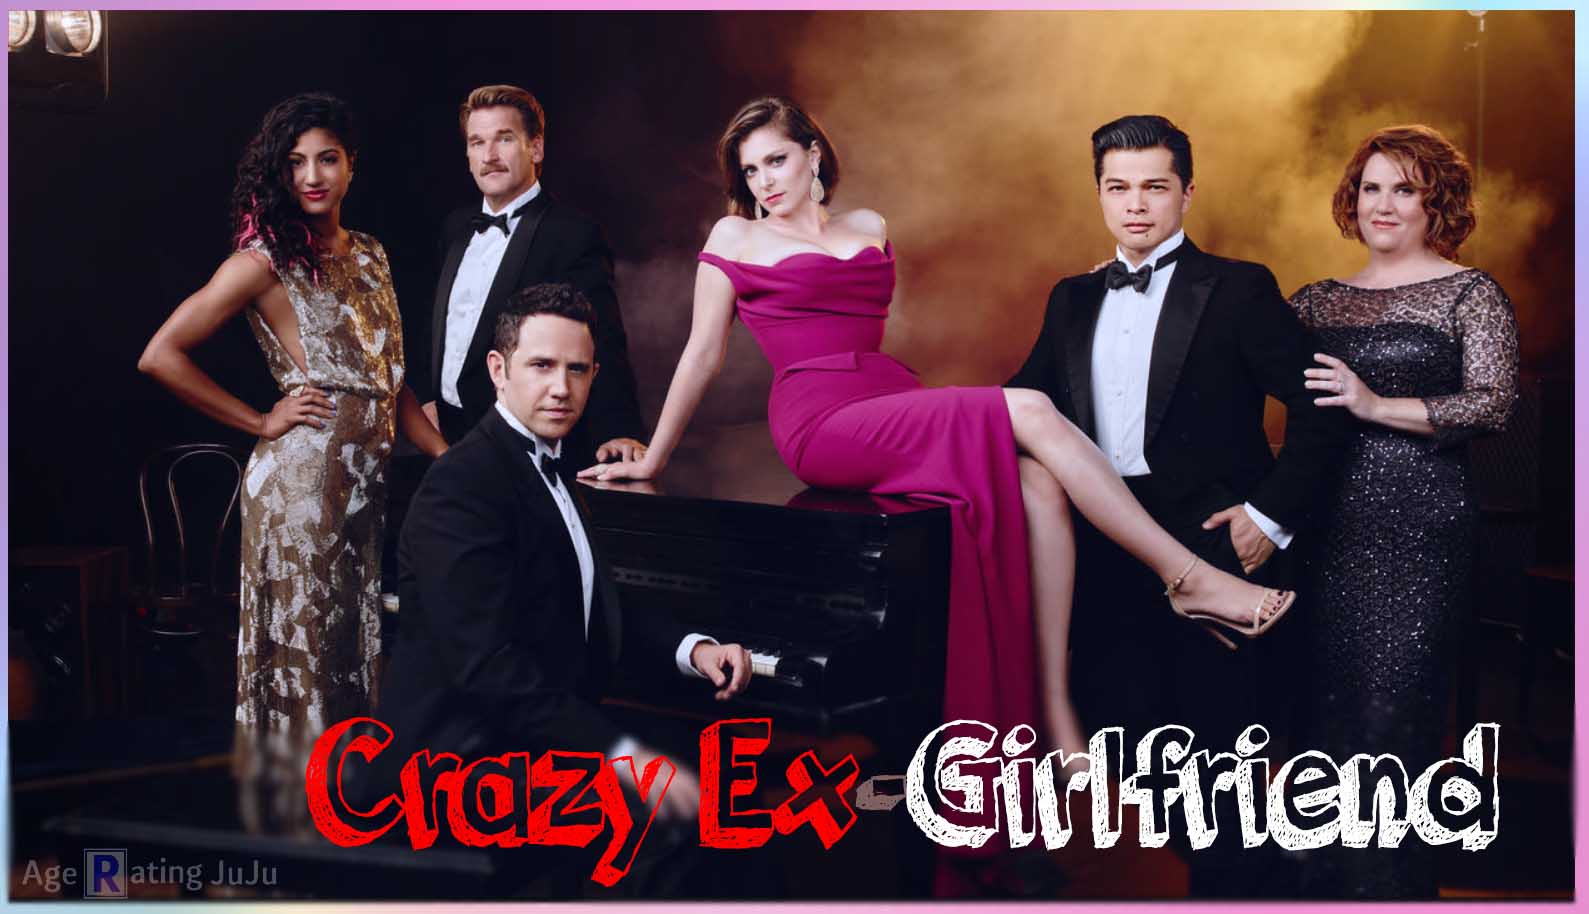 Crazy Ex-Girlfriend Age Rating 2018 - TV Show Poster Images and Wallpapers